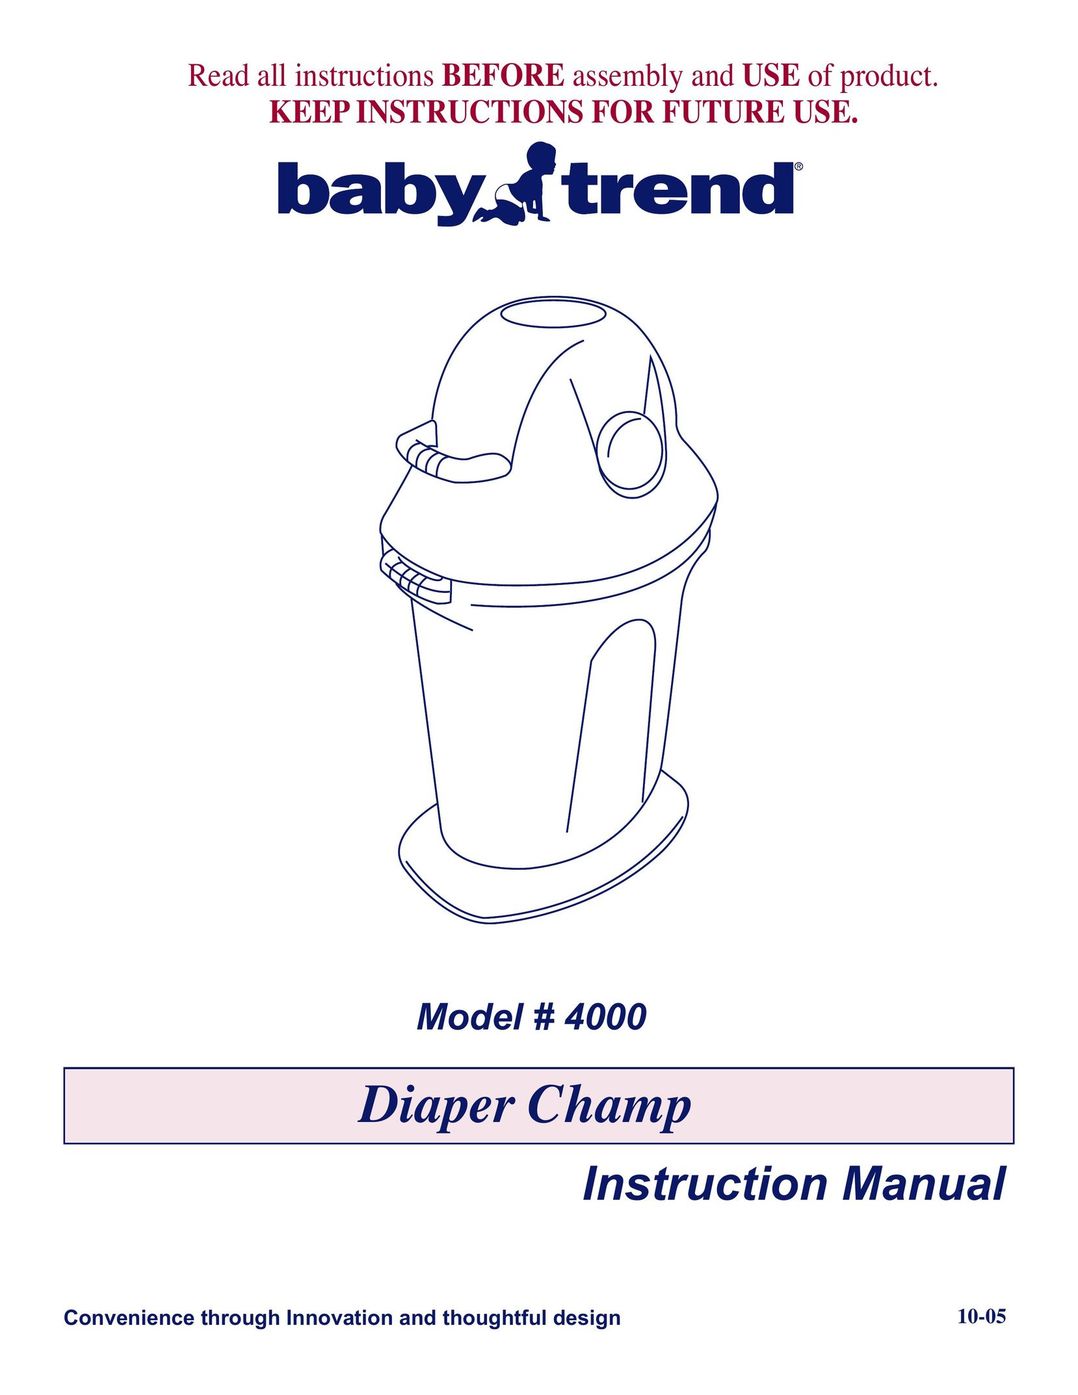 Baby Trend 4000 Baby Accessories User Manual (Page 1)